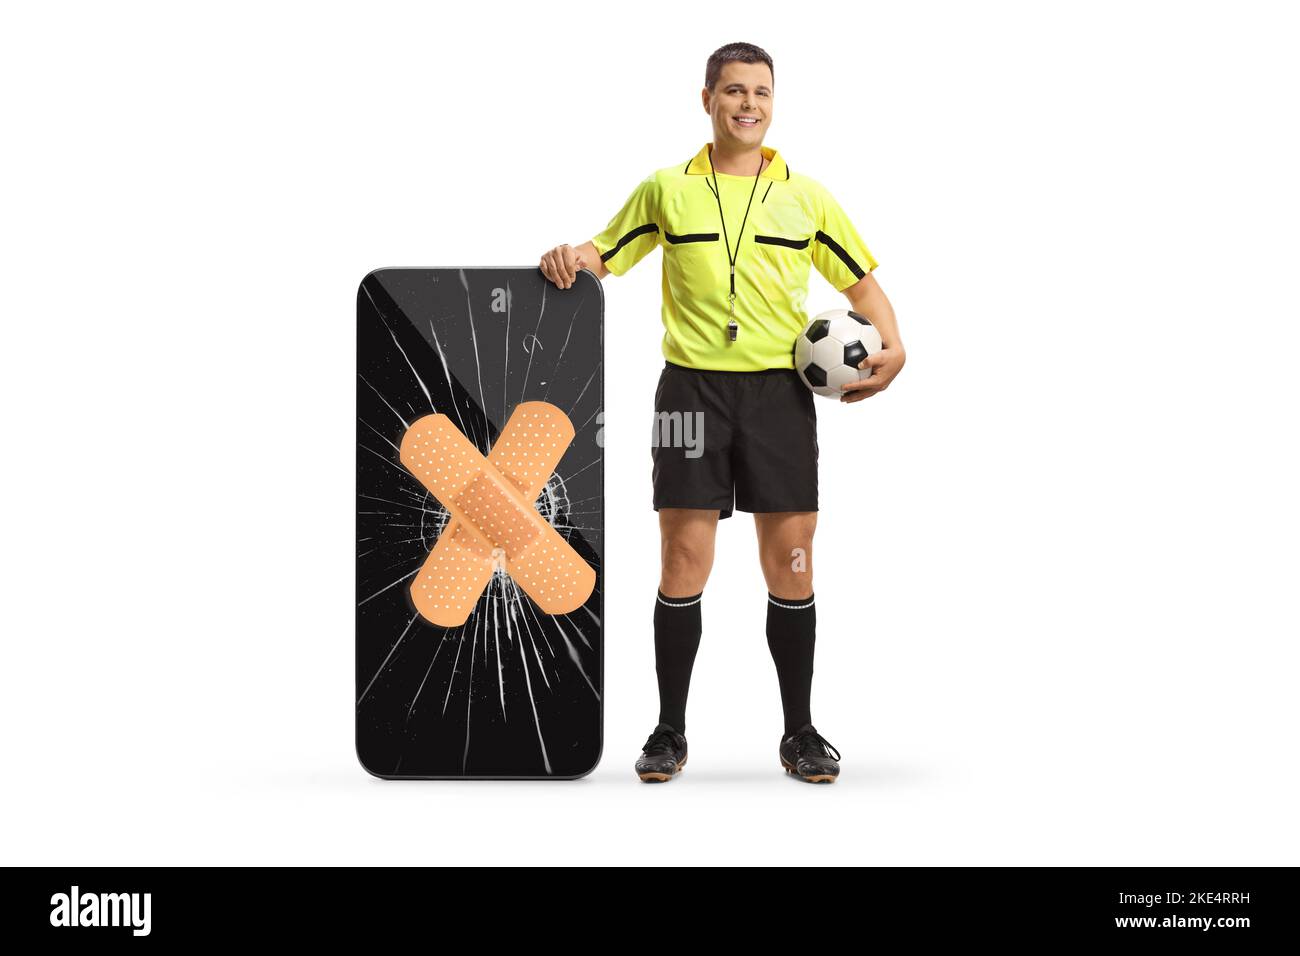 Full length portrait of a football referee standing next to a smartphone with broken screen fixed with bandage isolated on white background Stock Photo